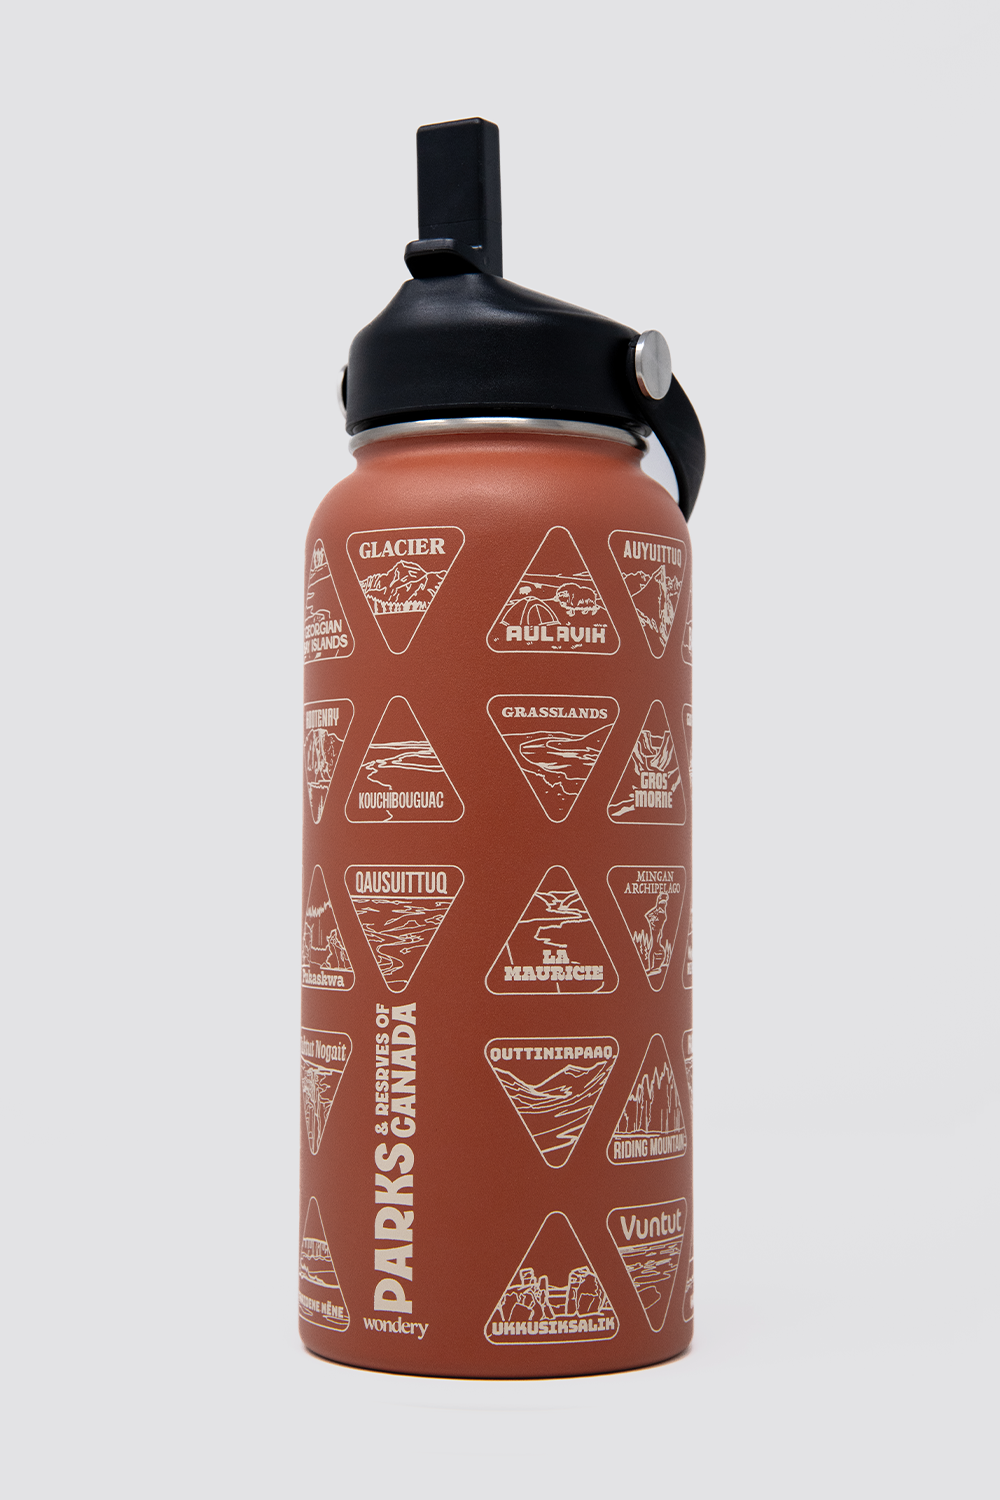 Parks and Reserves of Canada Bucket List Water Bottle